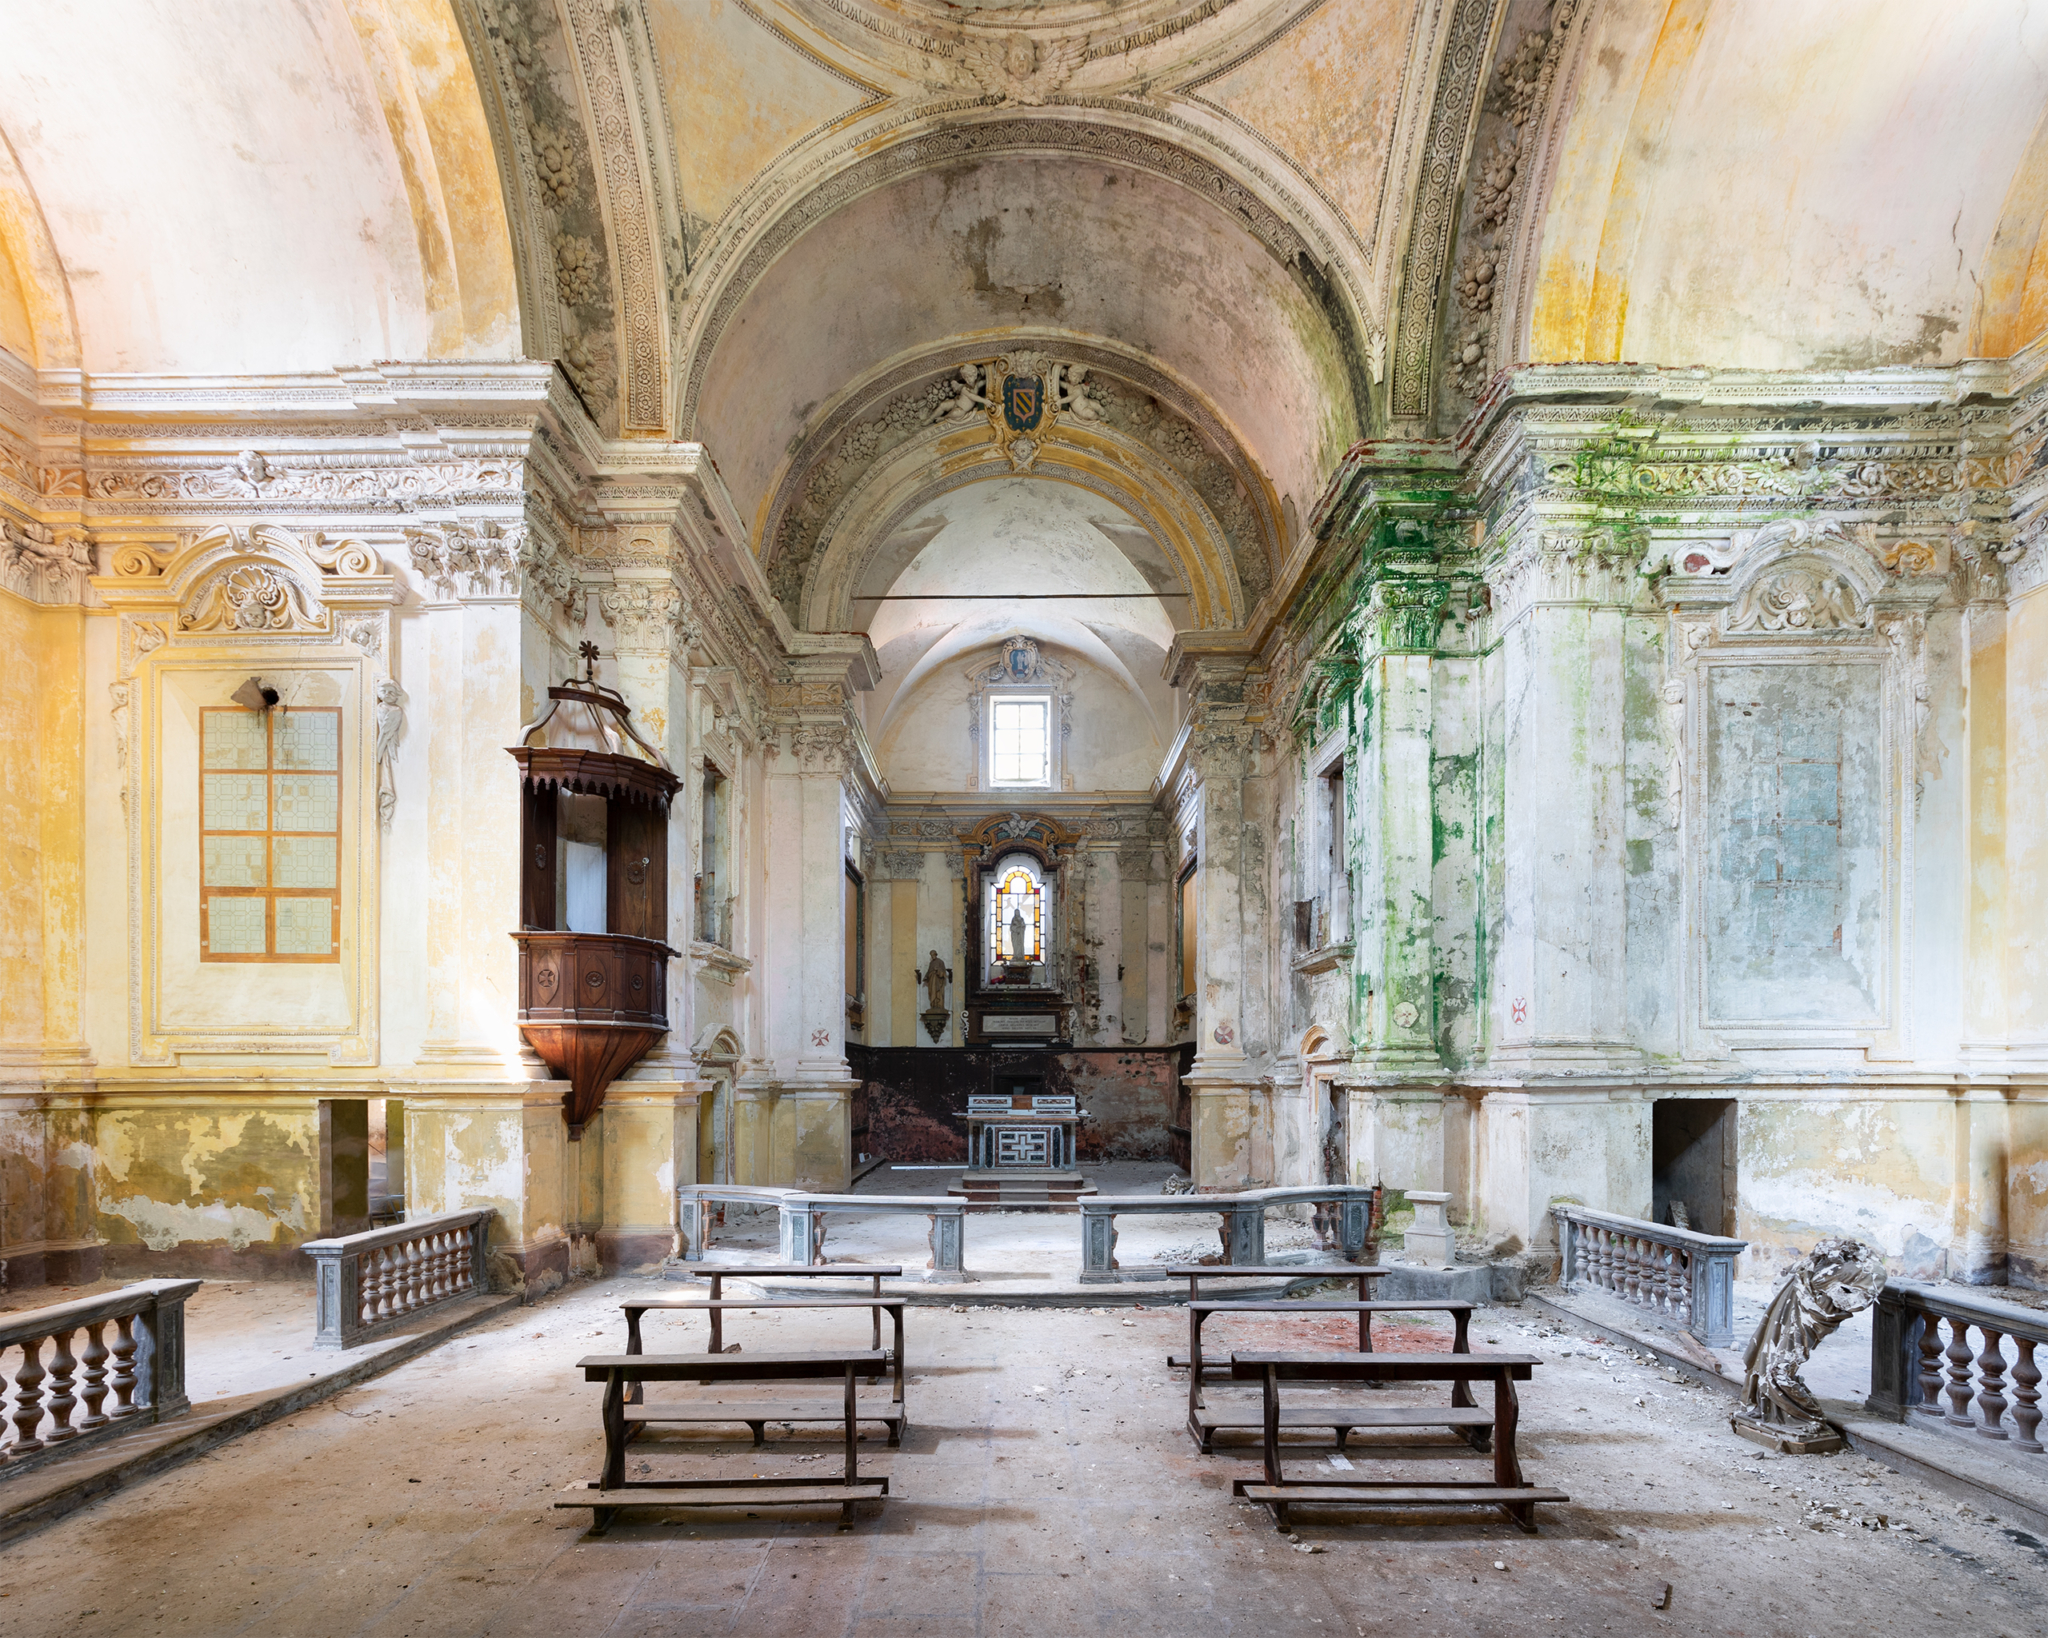 Abandoned church with stunning architecture inside an old medical complex in Italy